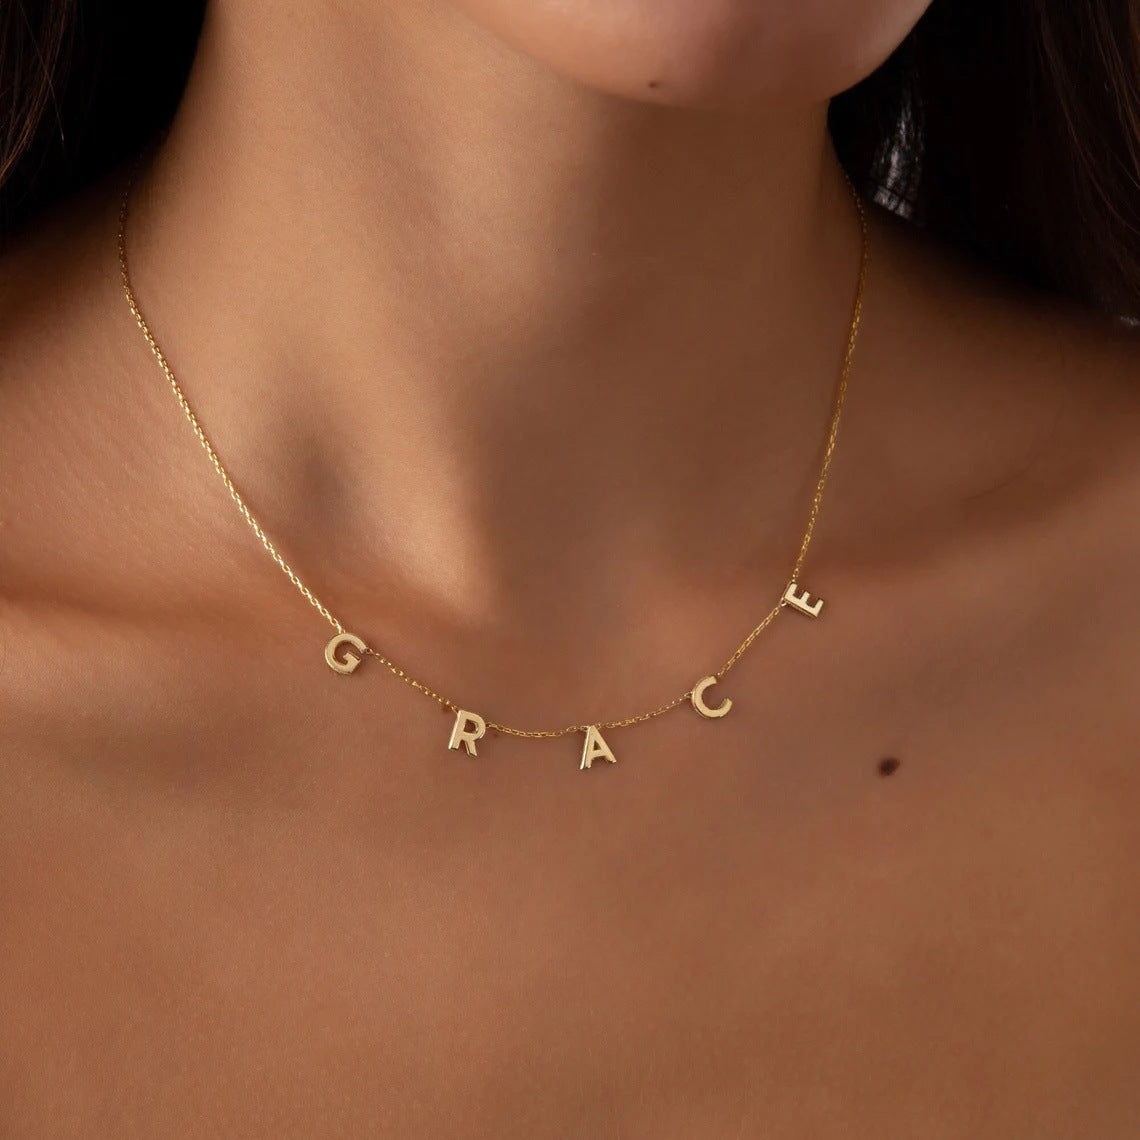 A woman wearing the Amara Initial Necklace in gold with initials G R A C E.